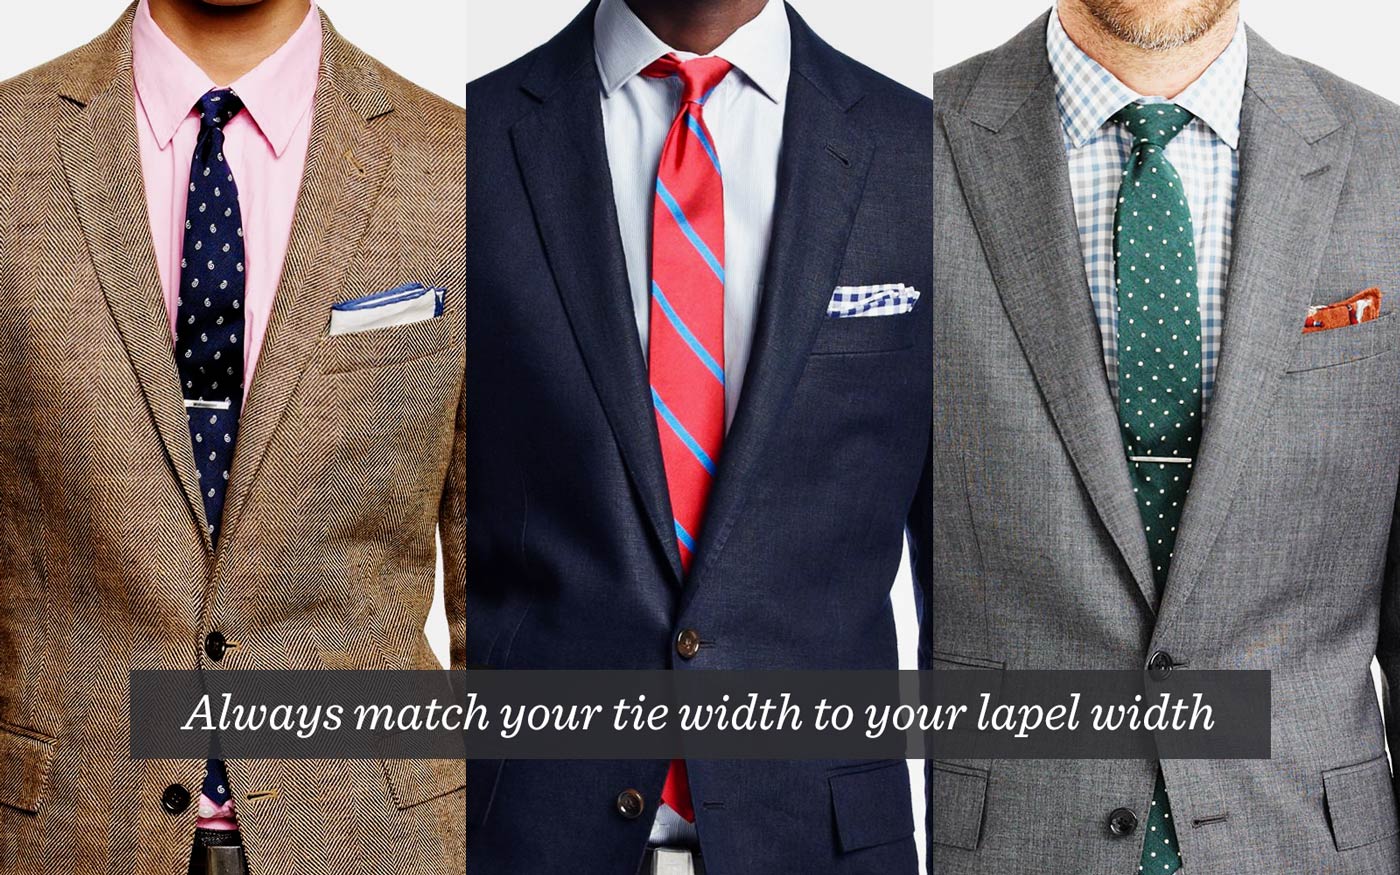 three-men-in-suits-match-tie-width-and-lapel-width 